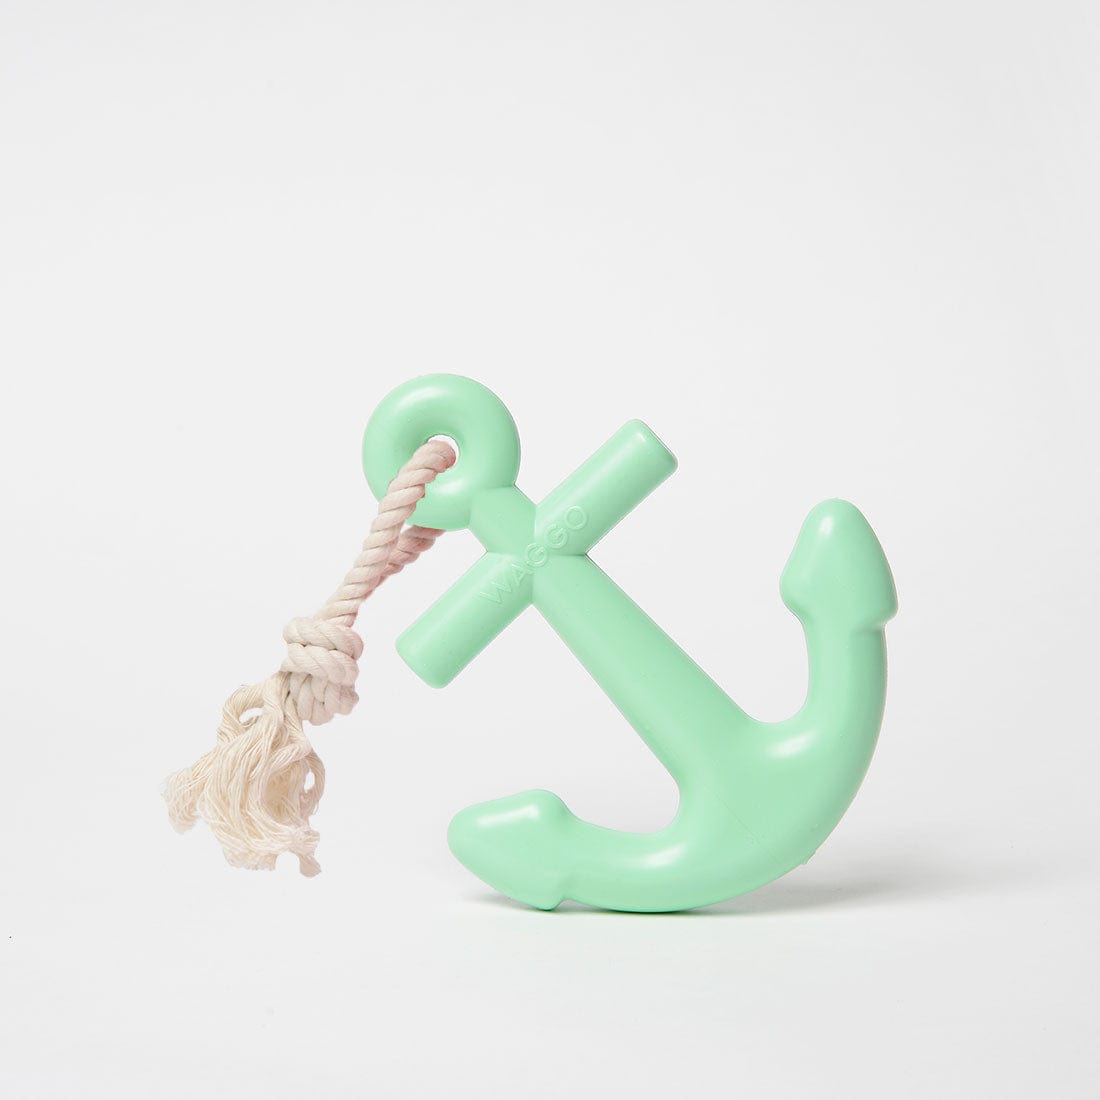 Waggo Mint Anchor / Large Anchors Aweigh Rubber Dog Toy by Waggo Lay Lo Pets